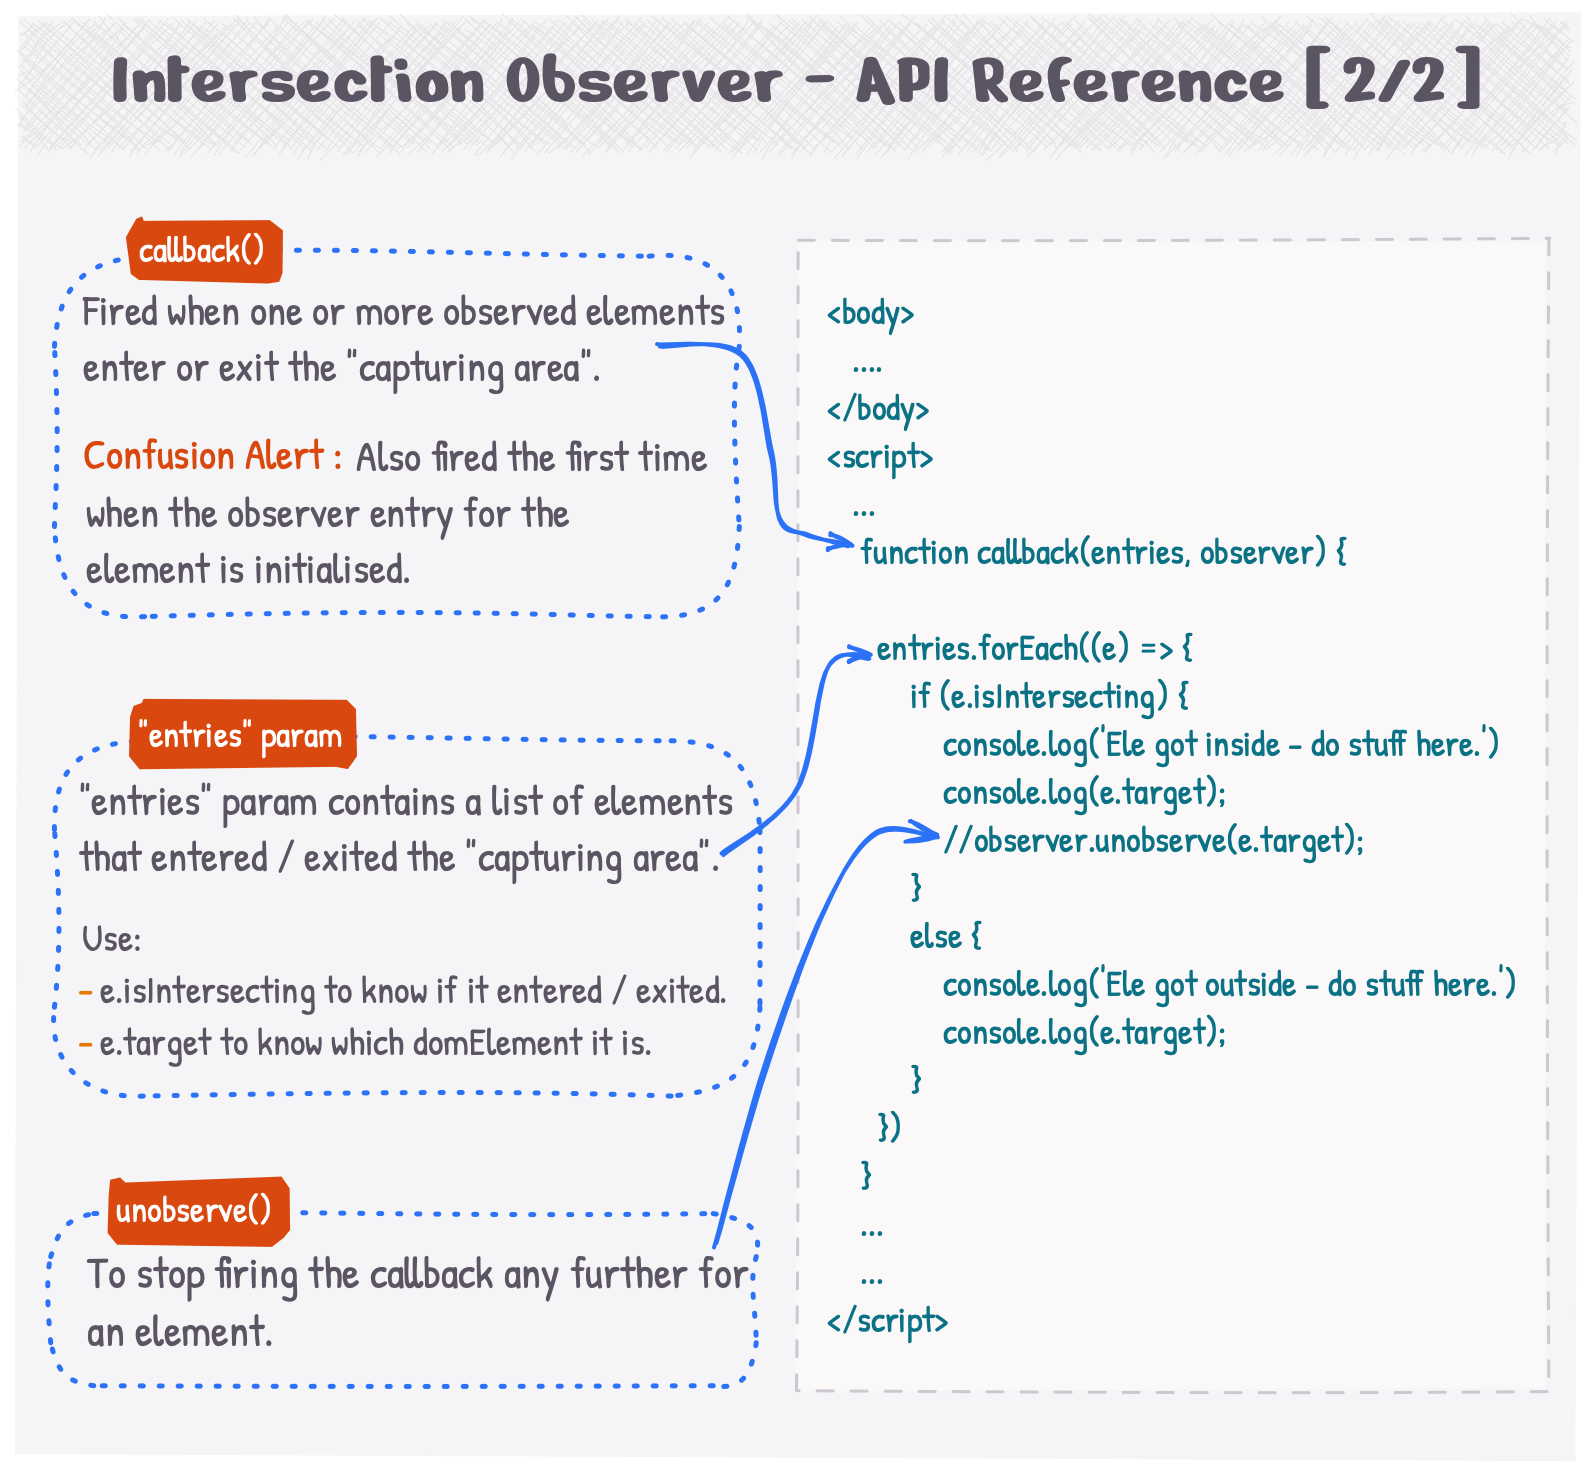 Intersection Observer - API Reference - 2